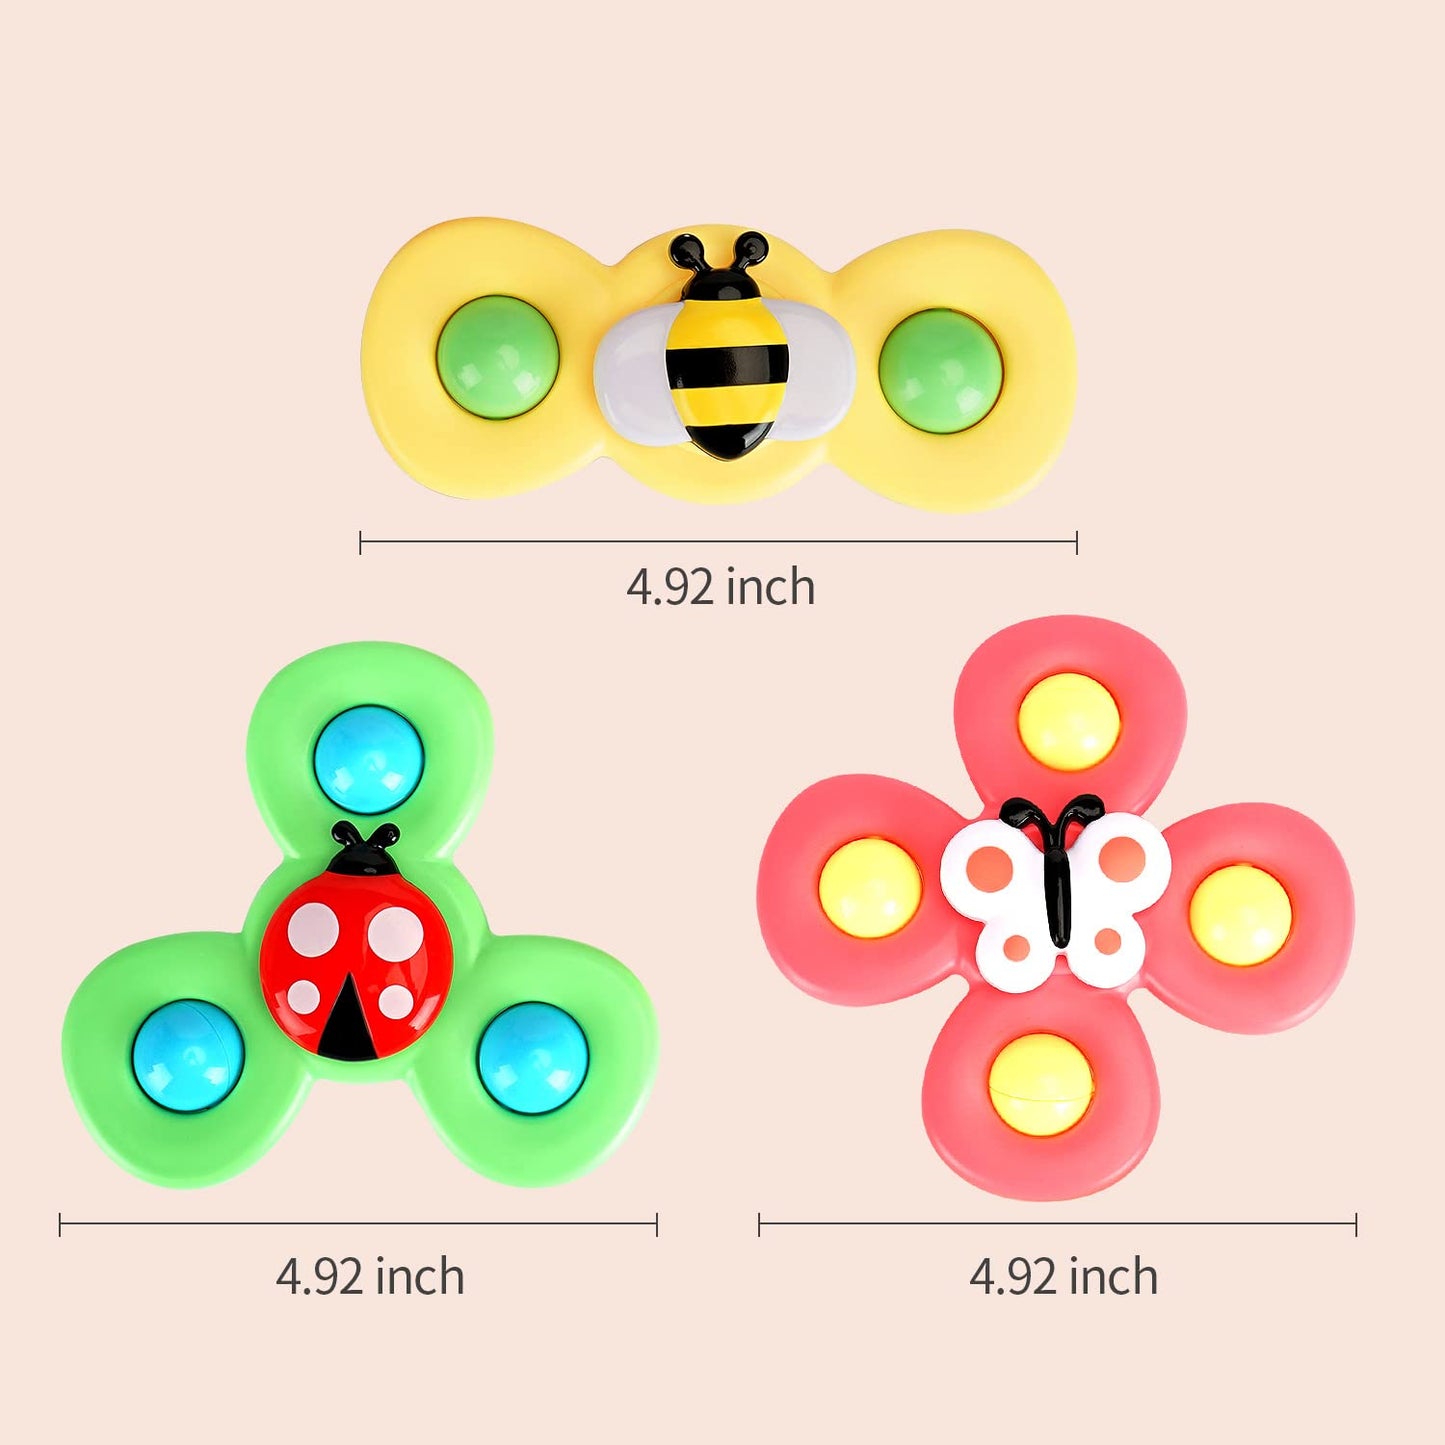 3PCS ALASOU Suction Cup Spinner Toys for 1 Year Old Boy Girl|Spinning Top Toddler Toys Age 1-2|1 2 Year Old Boy Birthday Gift|Baby Bath Toys for Kids Ages 1-3|Sensory Toys for Toddlers 1-3